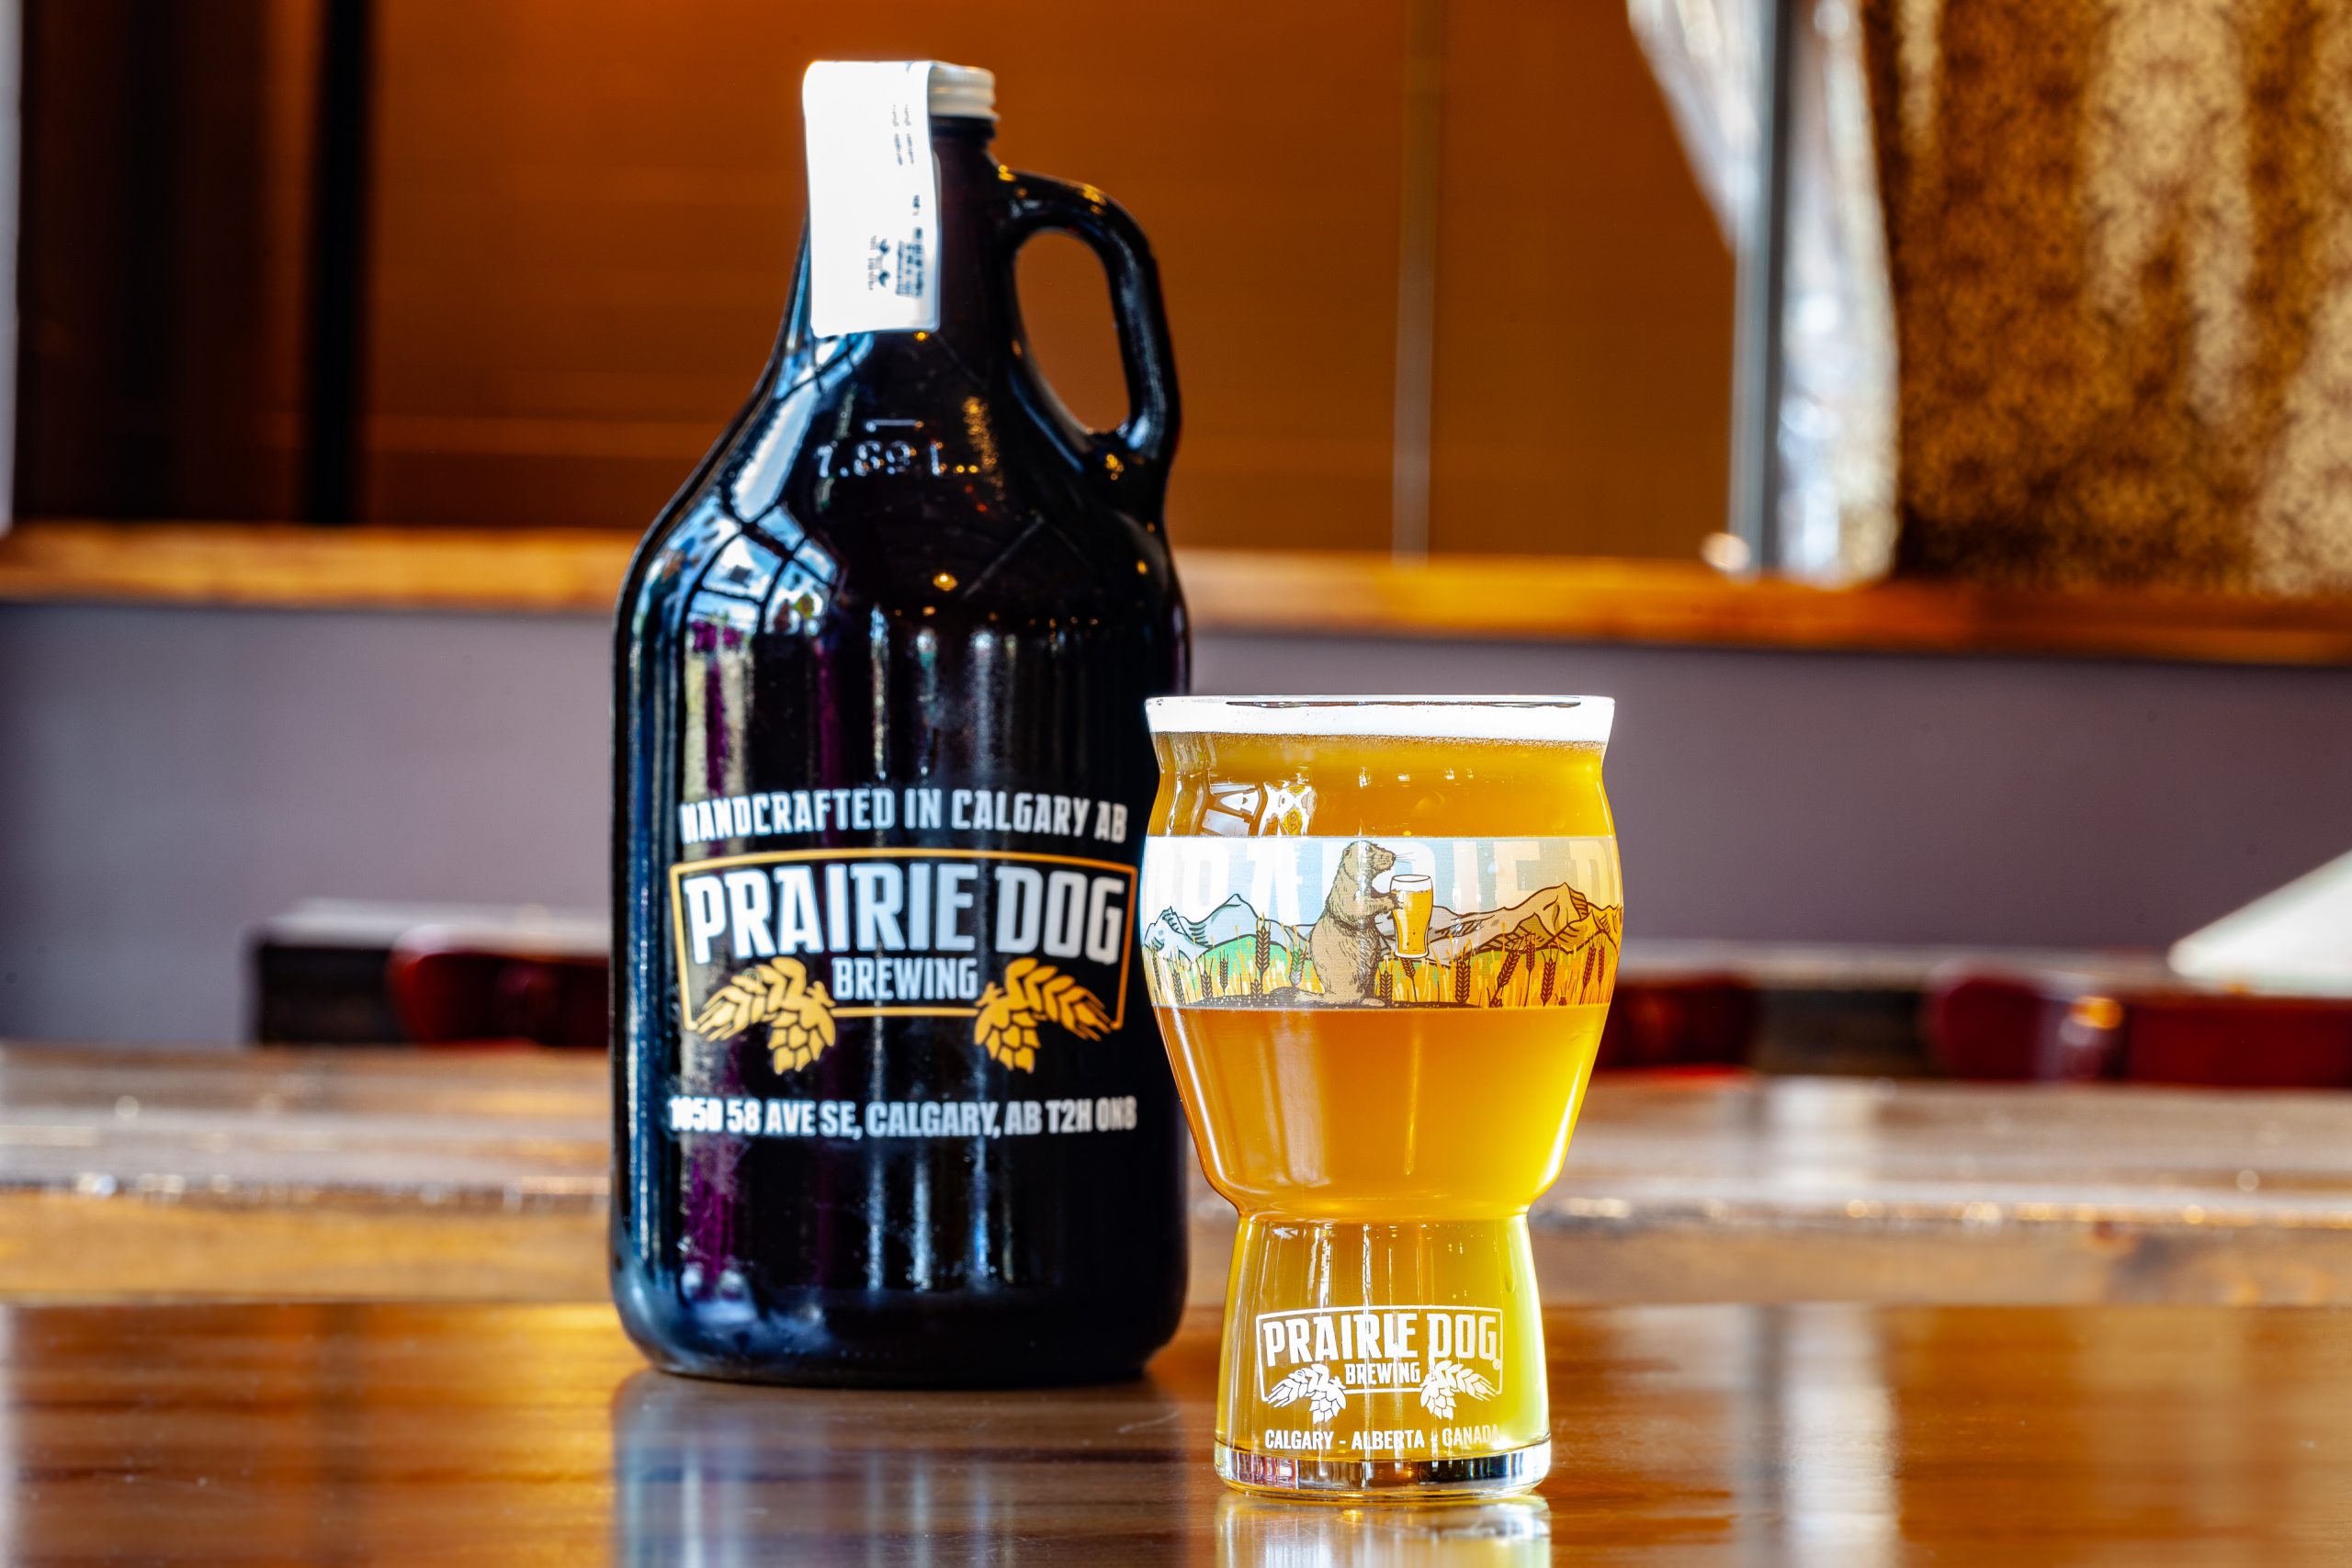 Prairie Dog Brewing's Ginger Lime Gose in a branded 16-oz US pint glass with a 64-oz branded growler jug in the background.